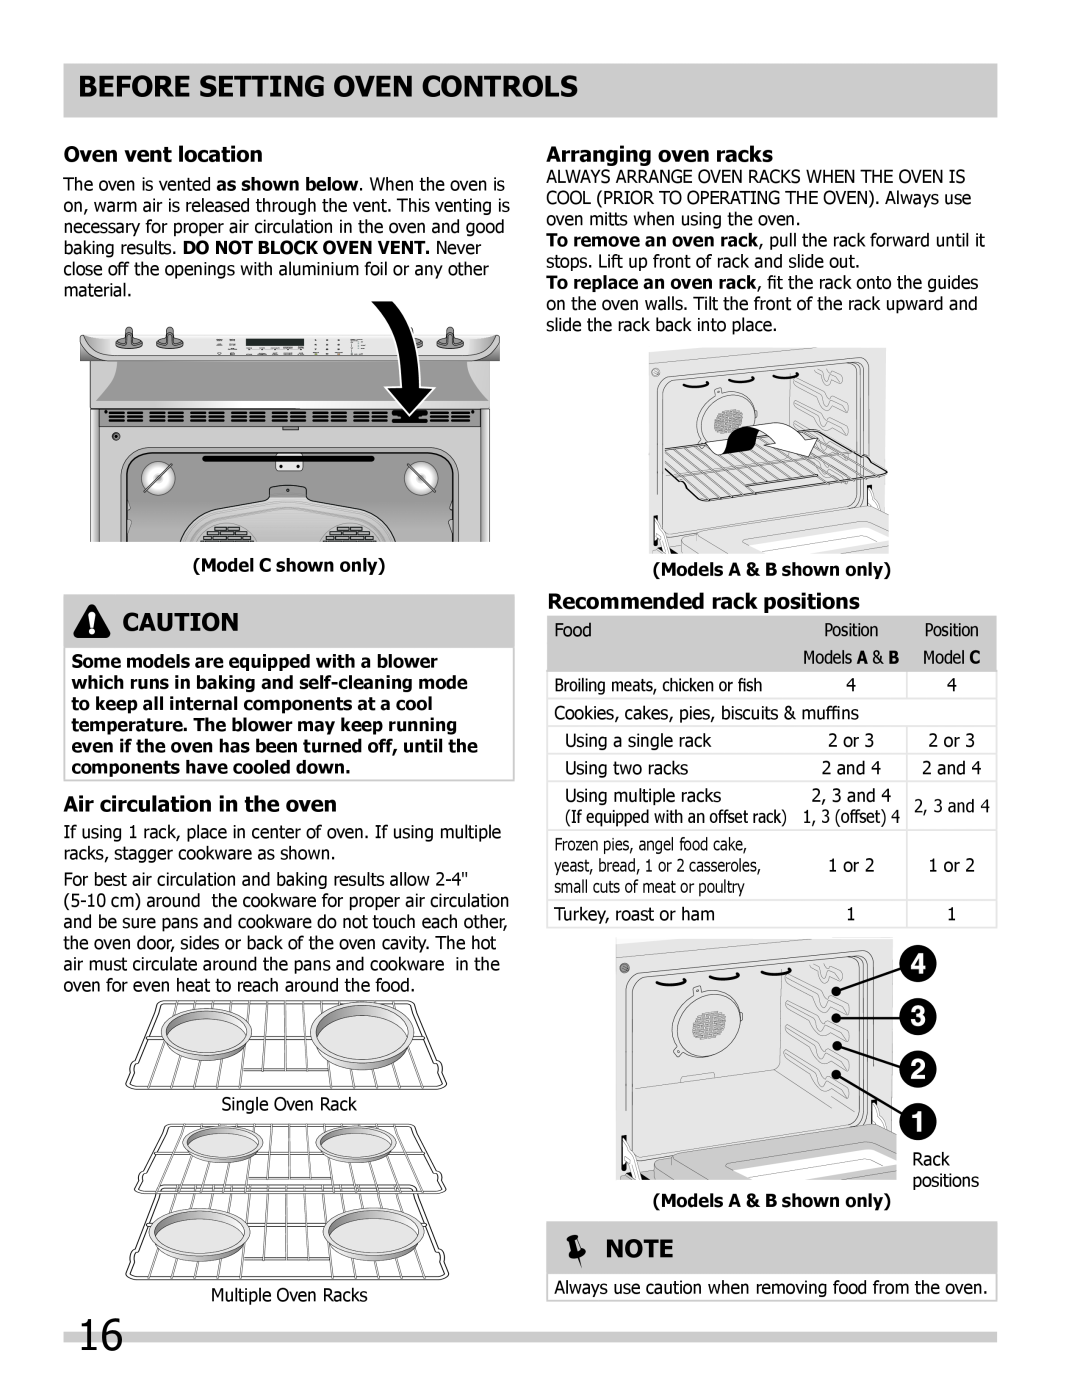 Frigidaire 318205804 Before Setting Oven Controls, Oven vent location, Arranging oven racks, Air circulation in the oven 